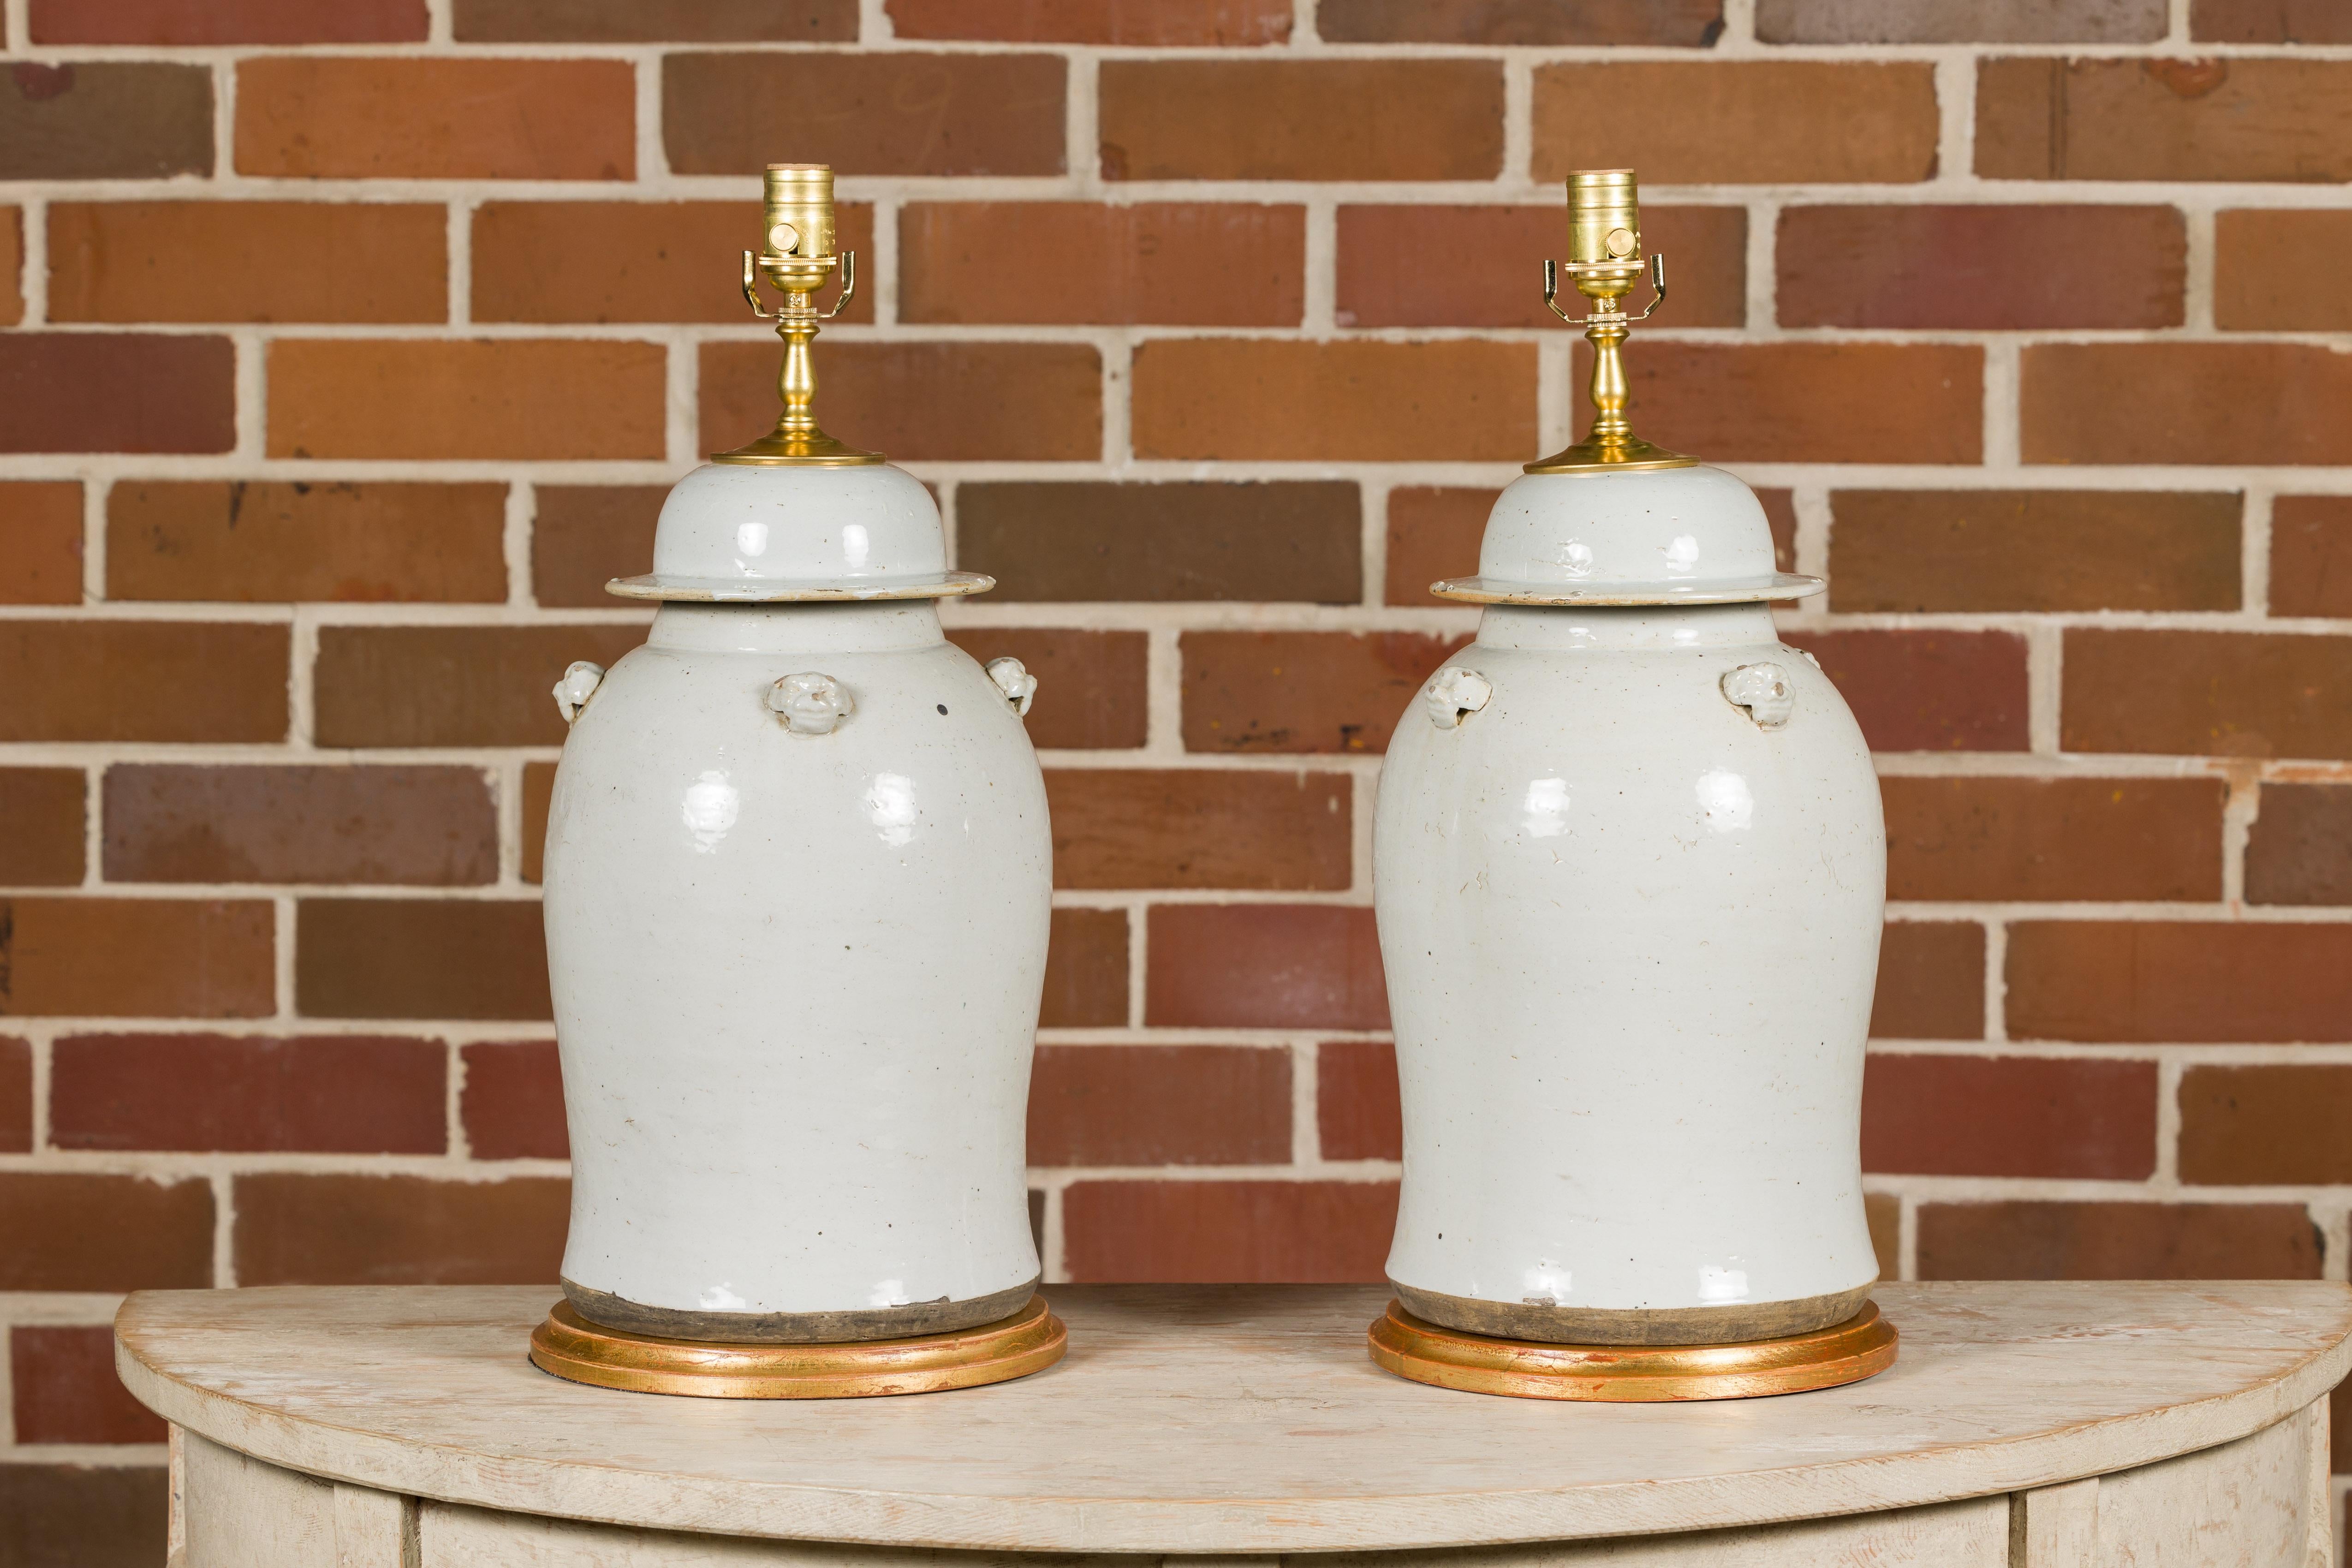 A pair of white porcelain lidded urns made into table lamps with single lights on circular gilded bases. Immerse your home in the elegant simplicity and timeless beauty of this exquisite pair of white porcelain lidded urns transformed into table